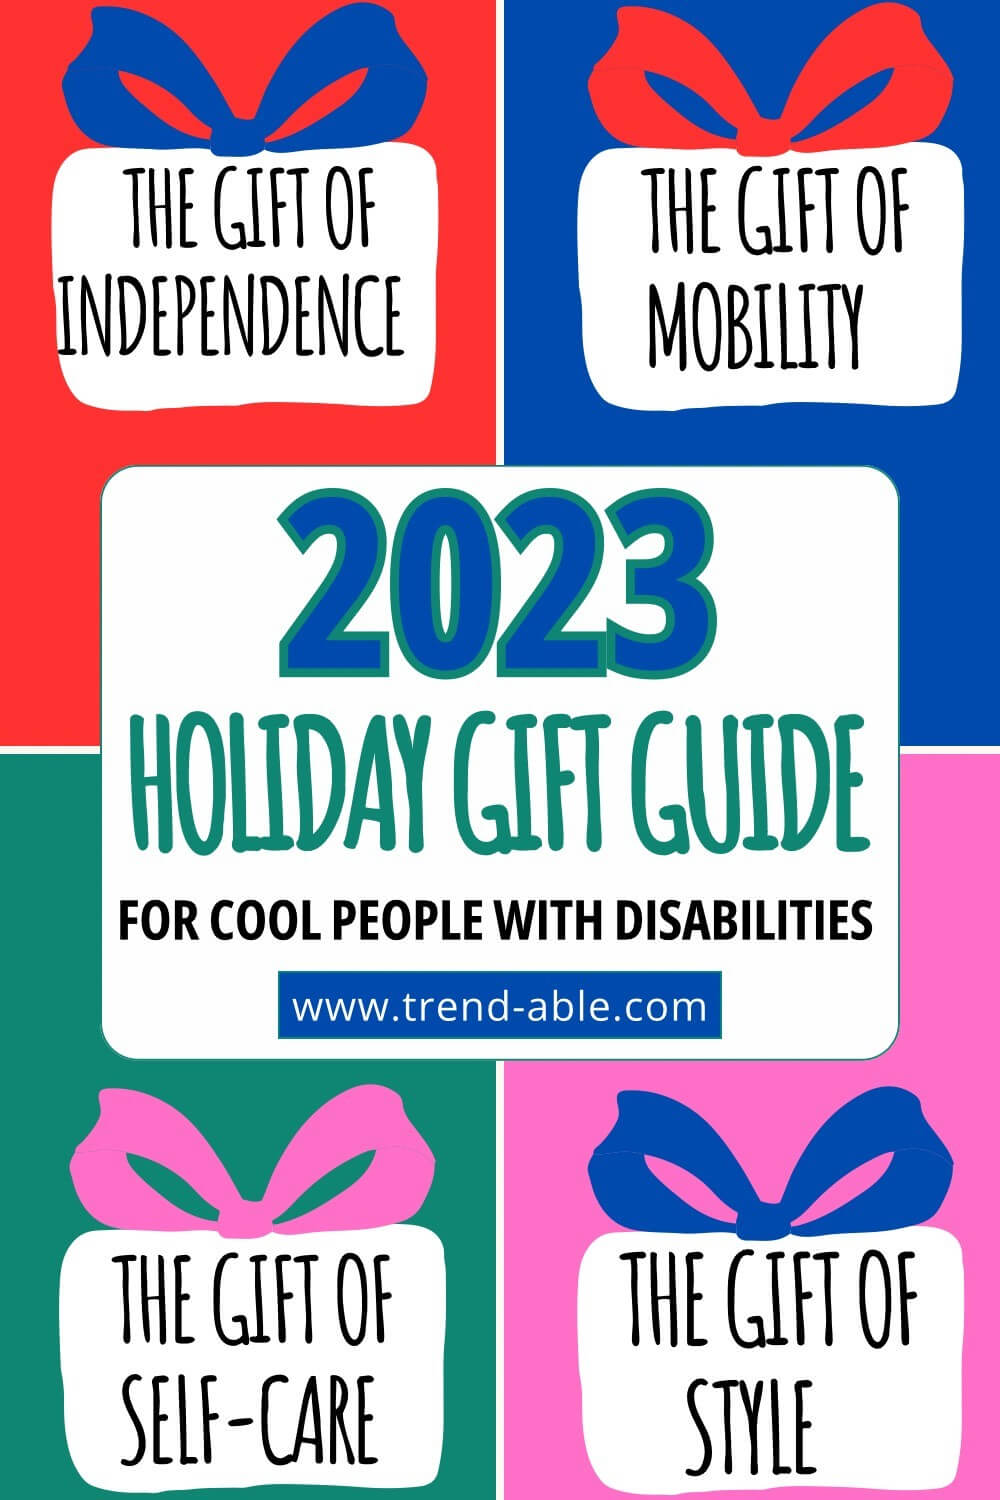 https://www.trend-able.com/wp-content/uploads/2023/11/2023-Holiday-Gift-Guide.jpg